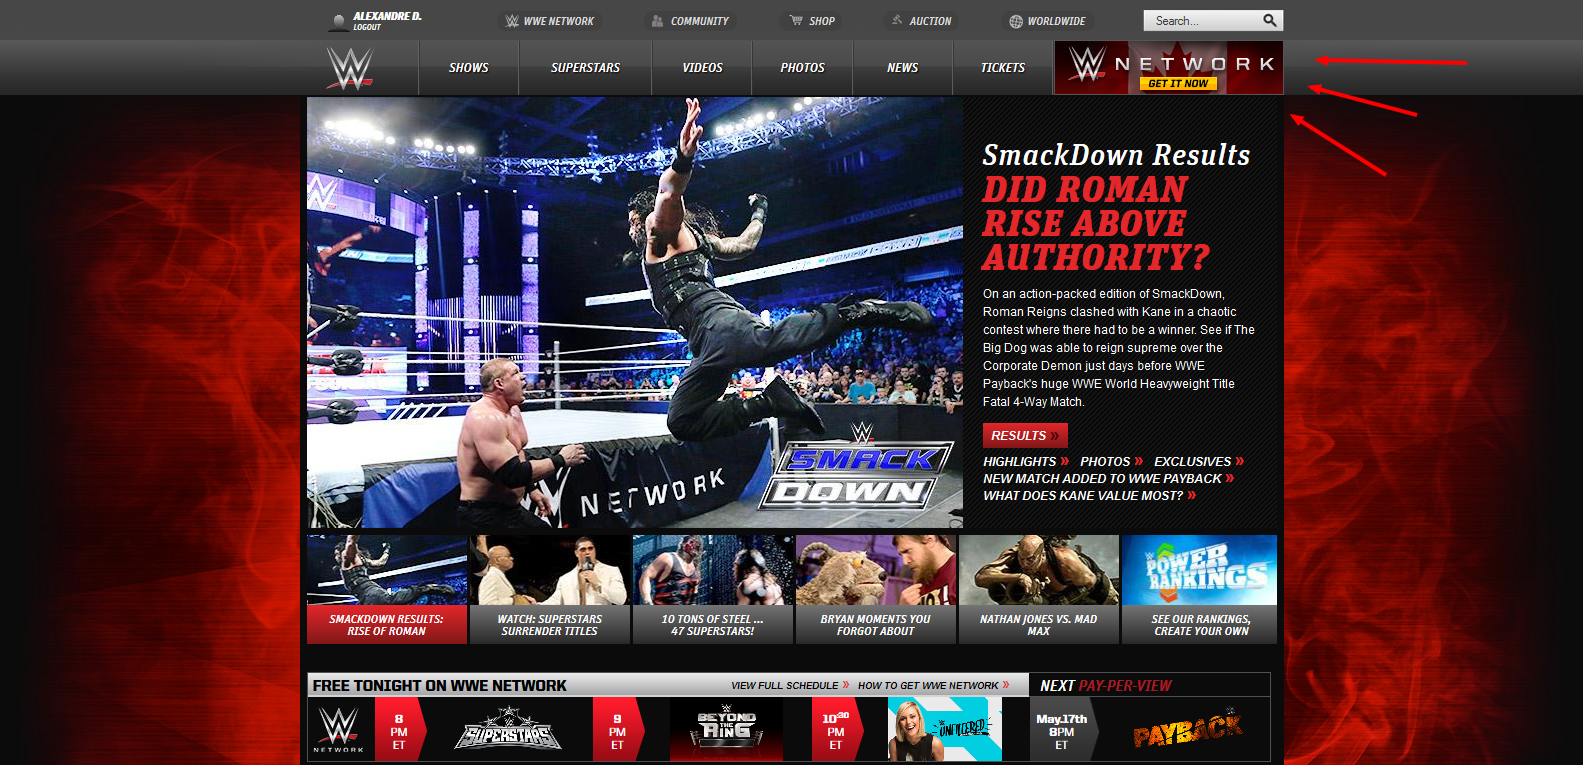 Network logout wwe Before you